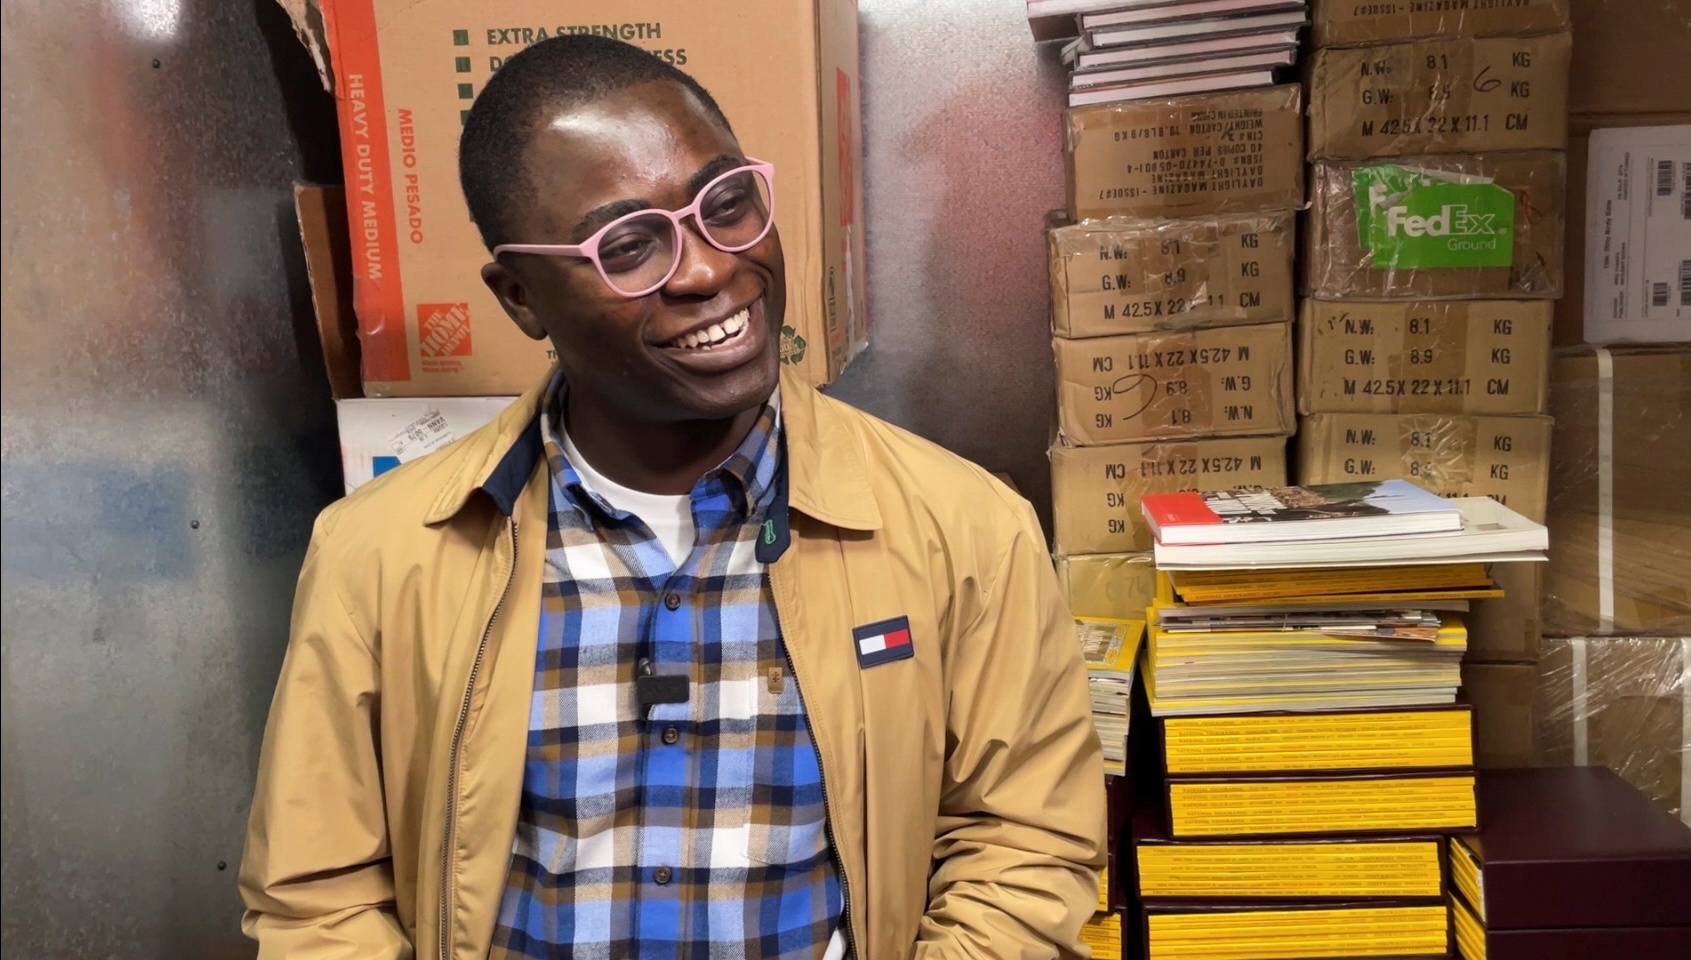 Ghanaian photographer Paul Ninson smiles while speaking to a journalist, in New York